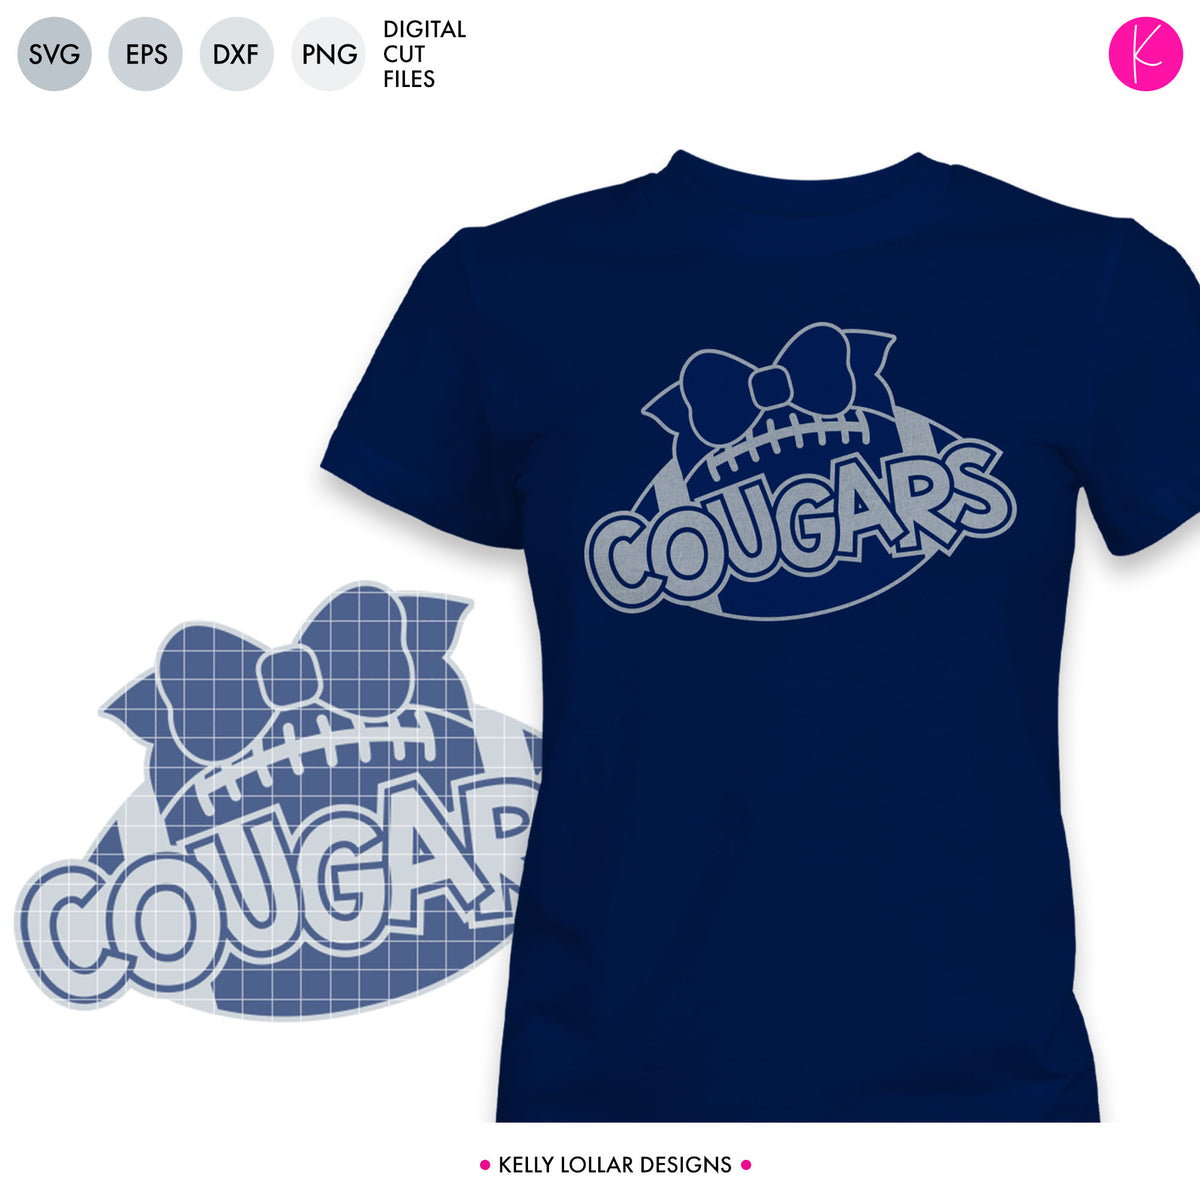 Cougars Football Bundle | SVG DXF EPS PNG Cut Files